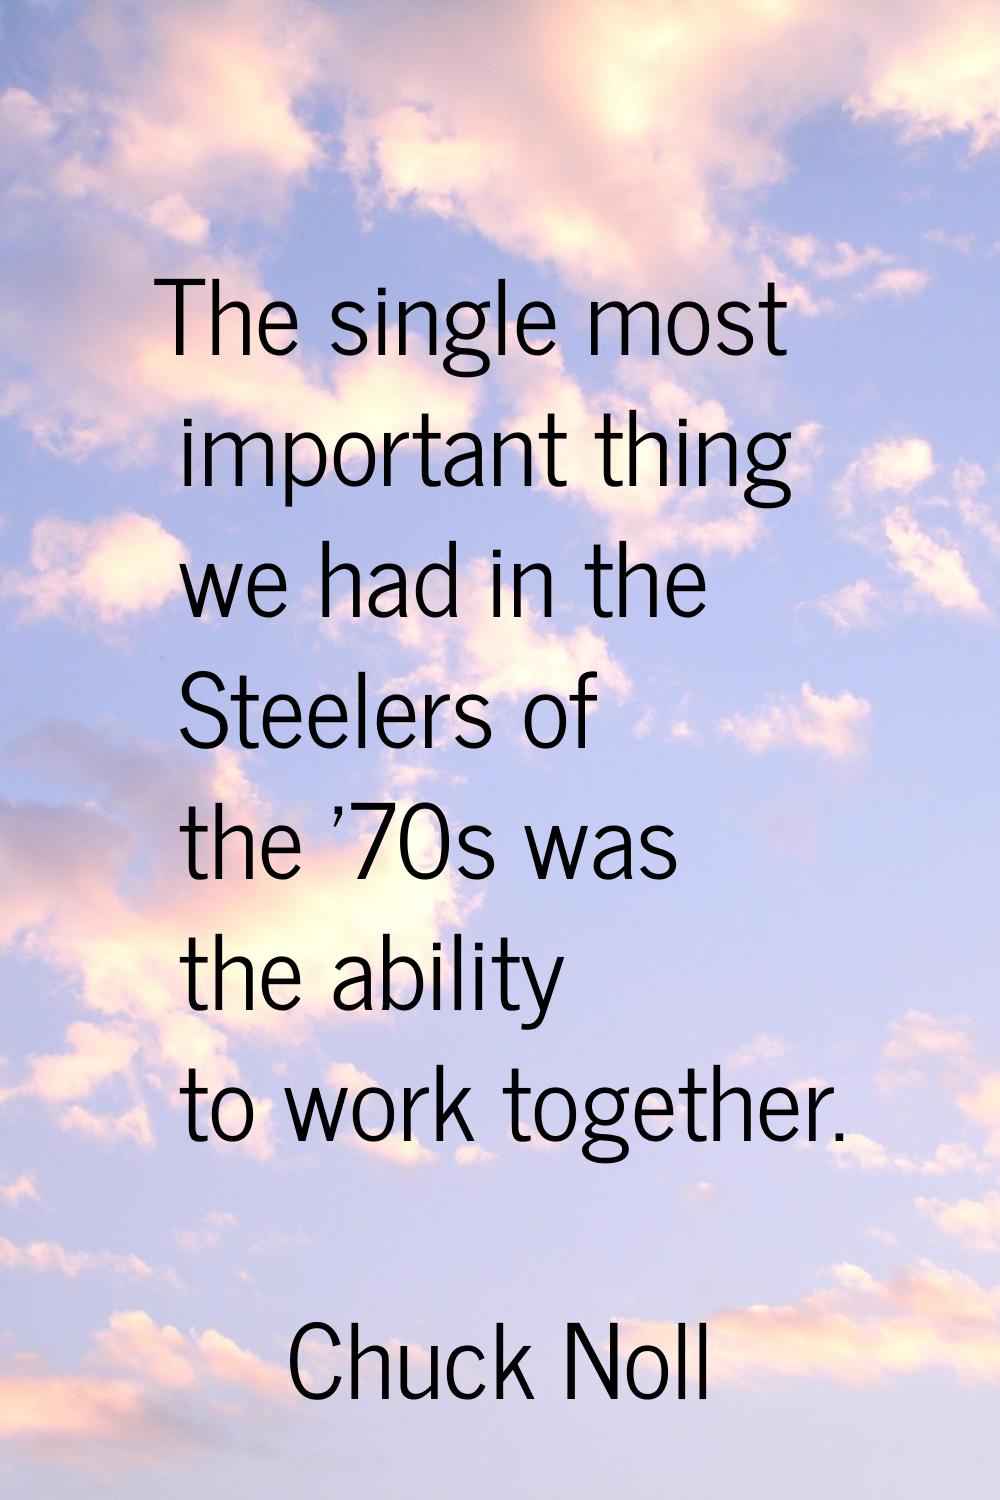 The single most important thing we had in the Steelers of the '70s was the ability to work together